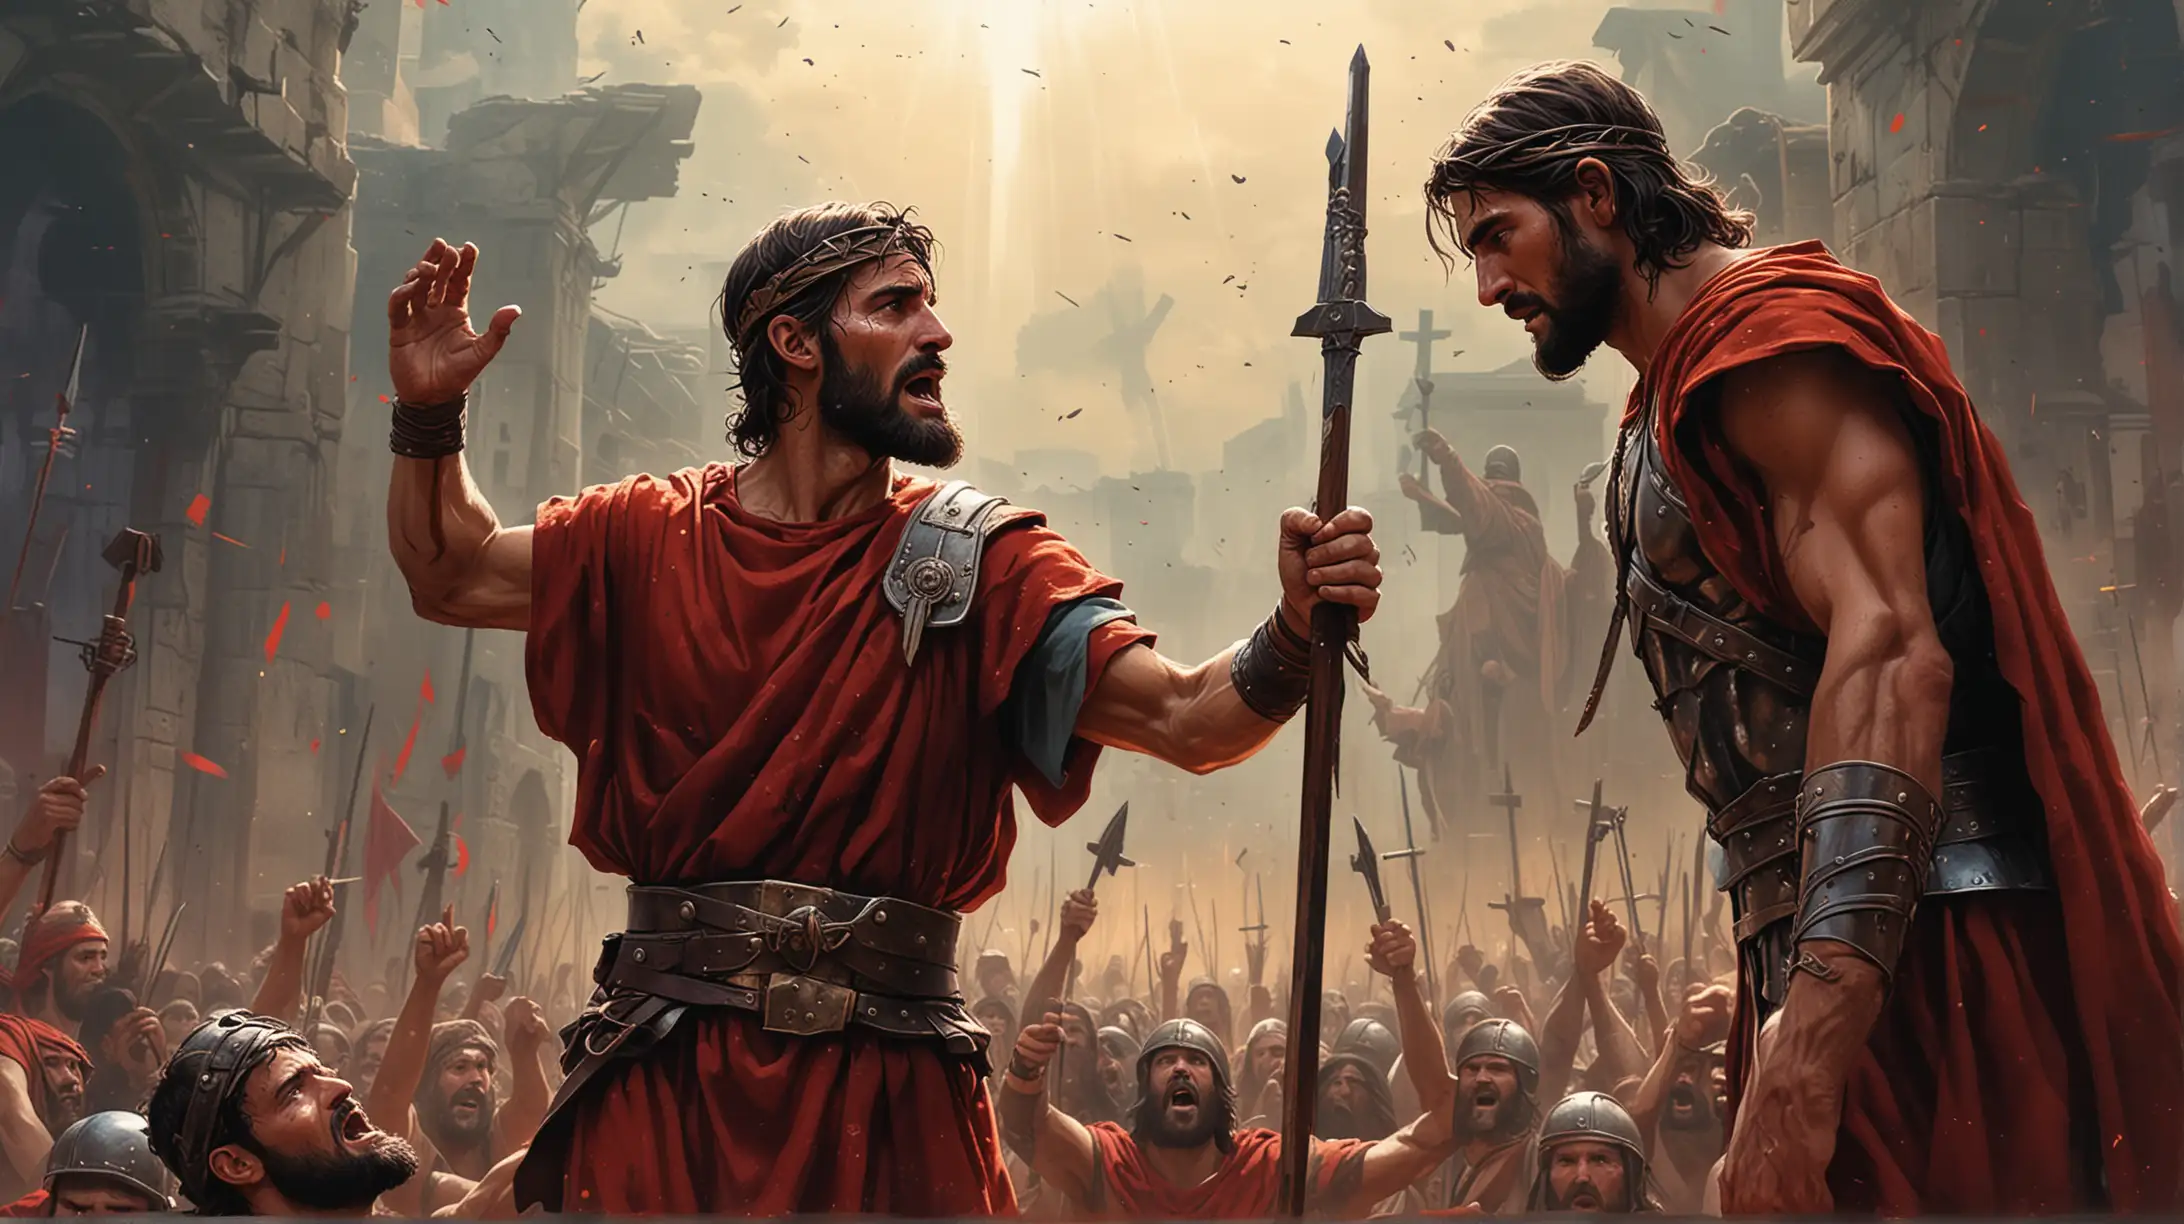 A dynamic comic-style illustration capturing the moment of encounter between the Roman soldier and Jesus during the crucifixion, with bold colors and expressive character designs to convey the emotional intensity of the scene.